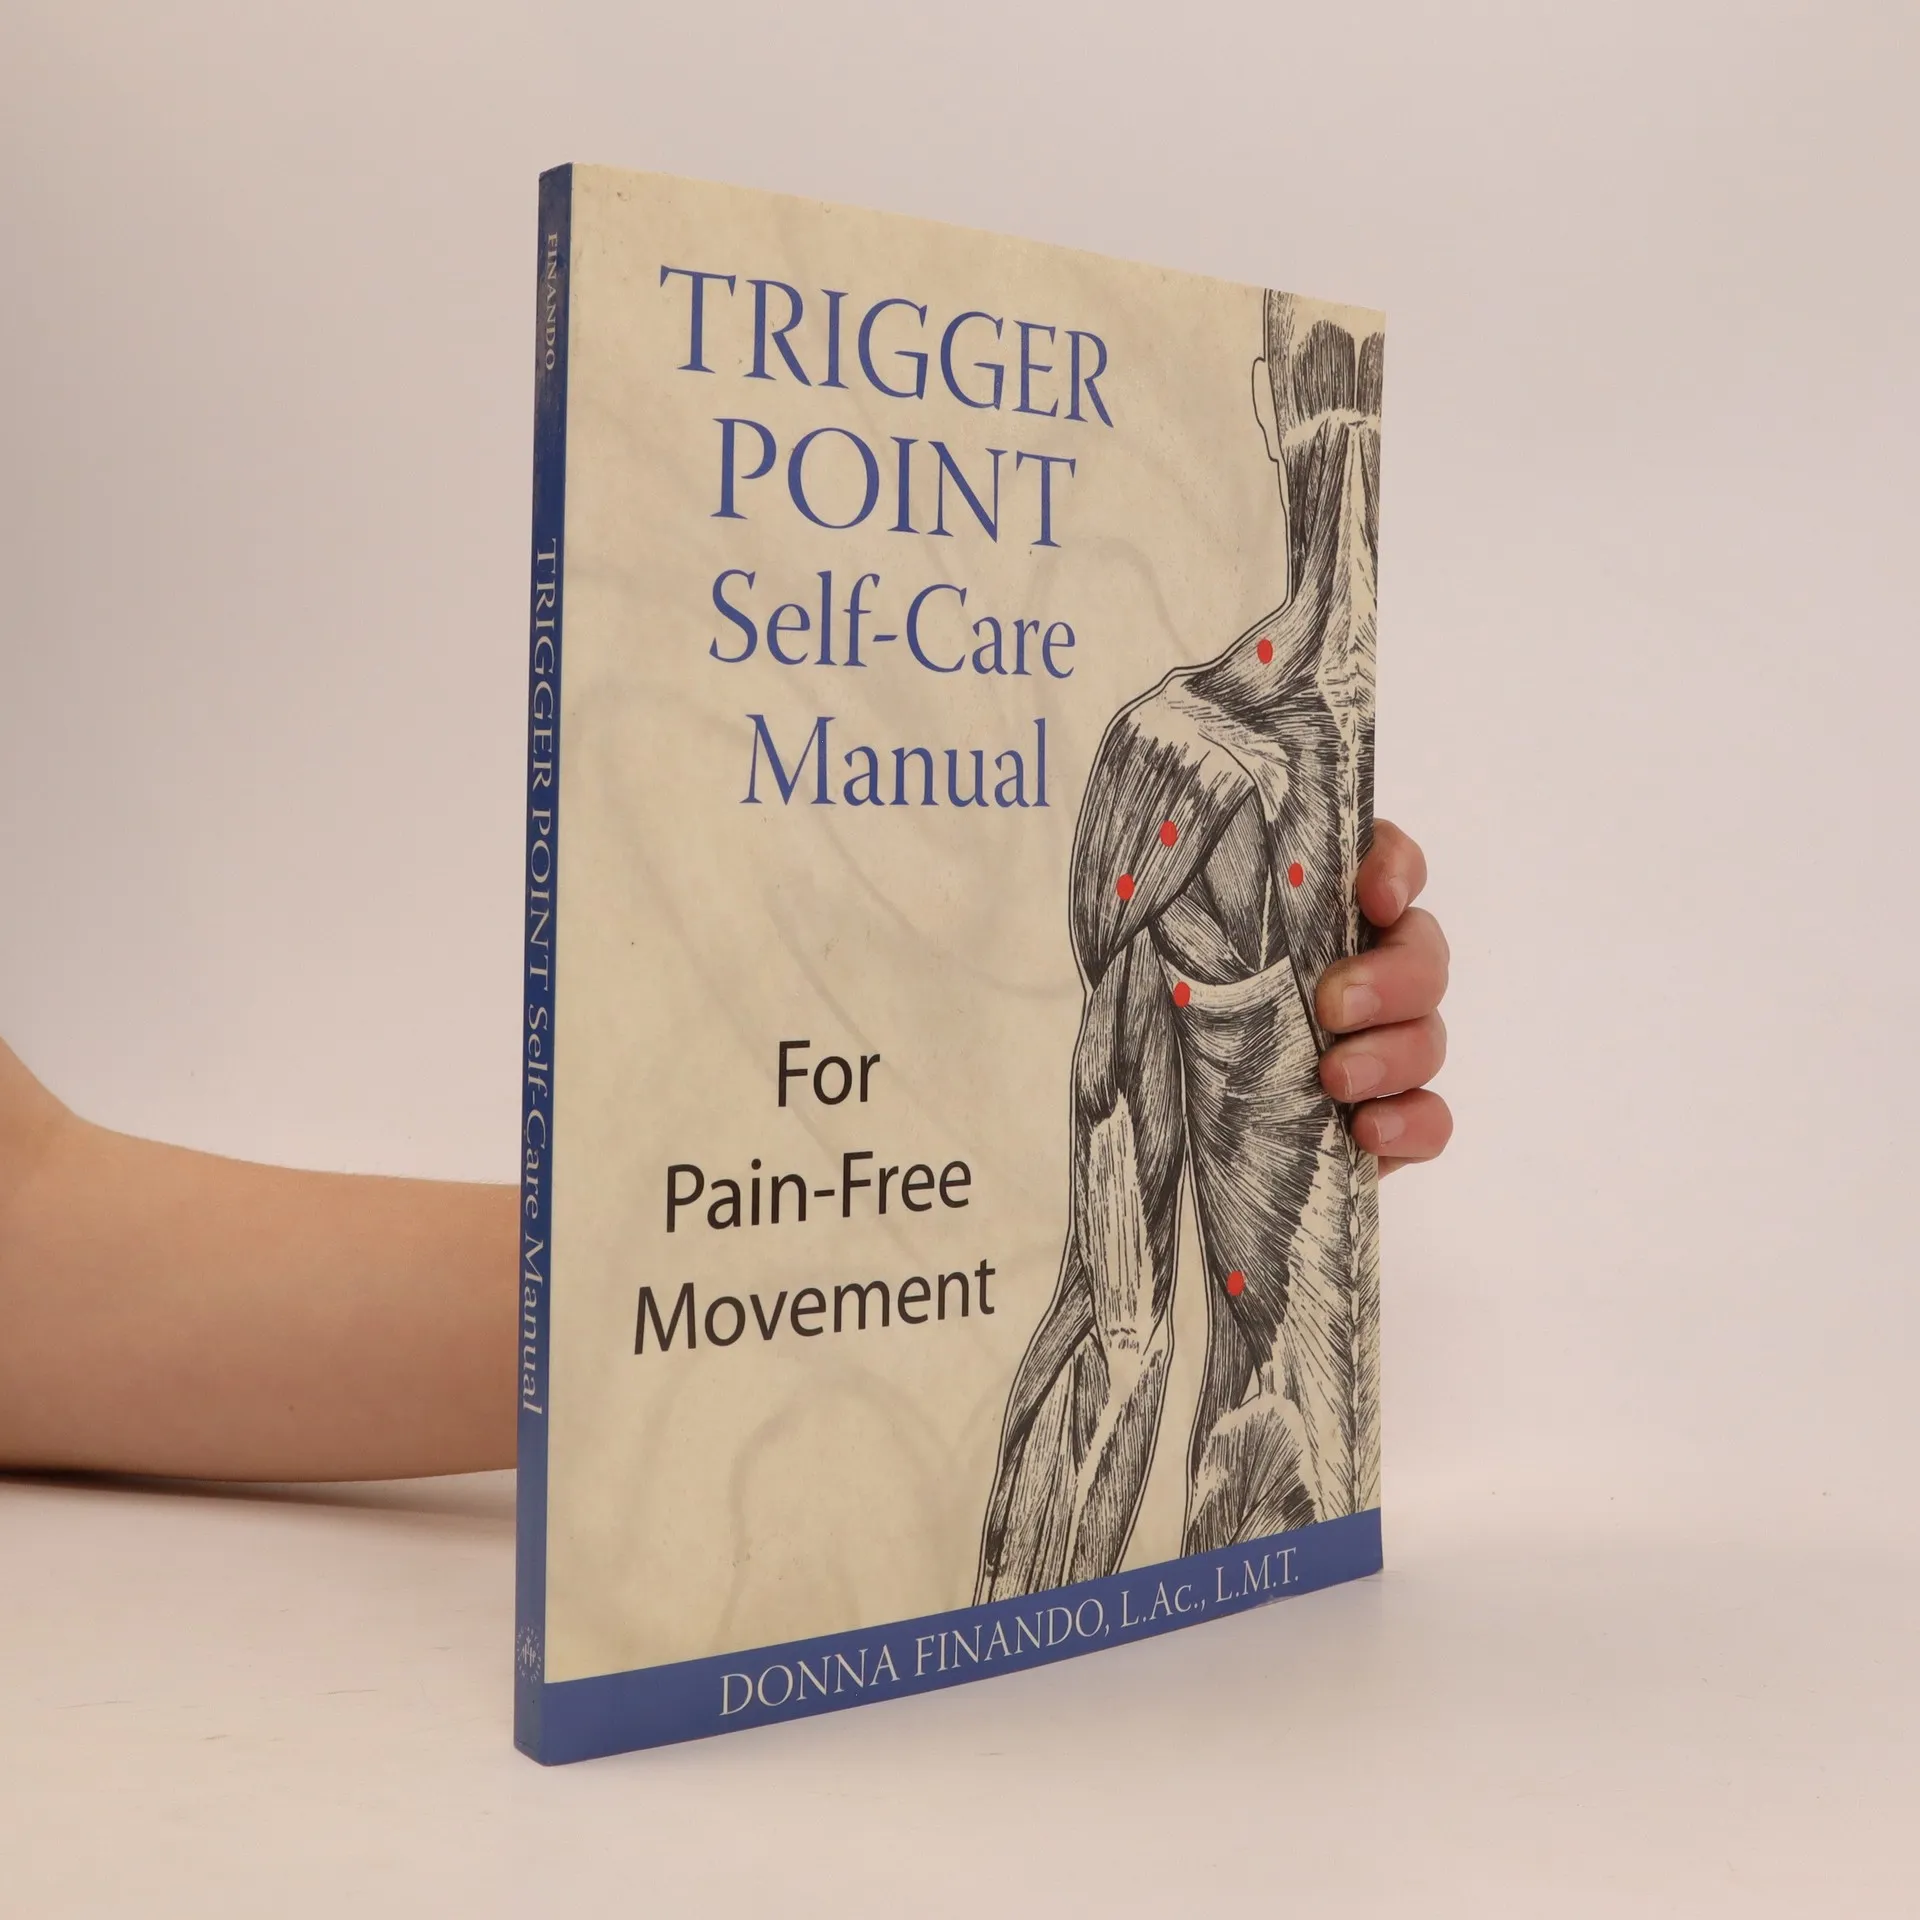 Trigger point self-care manual for pain-free movement - Donna Finando 